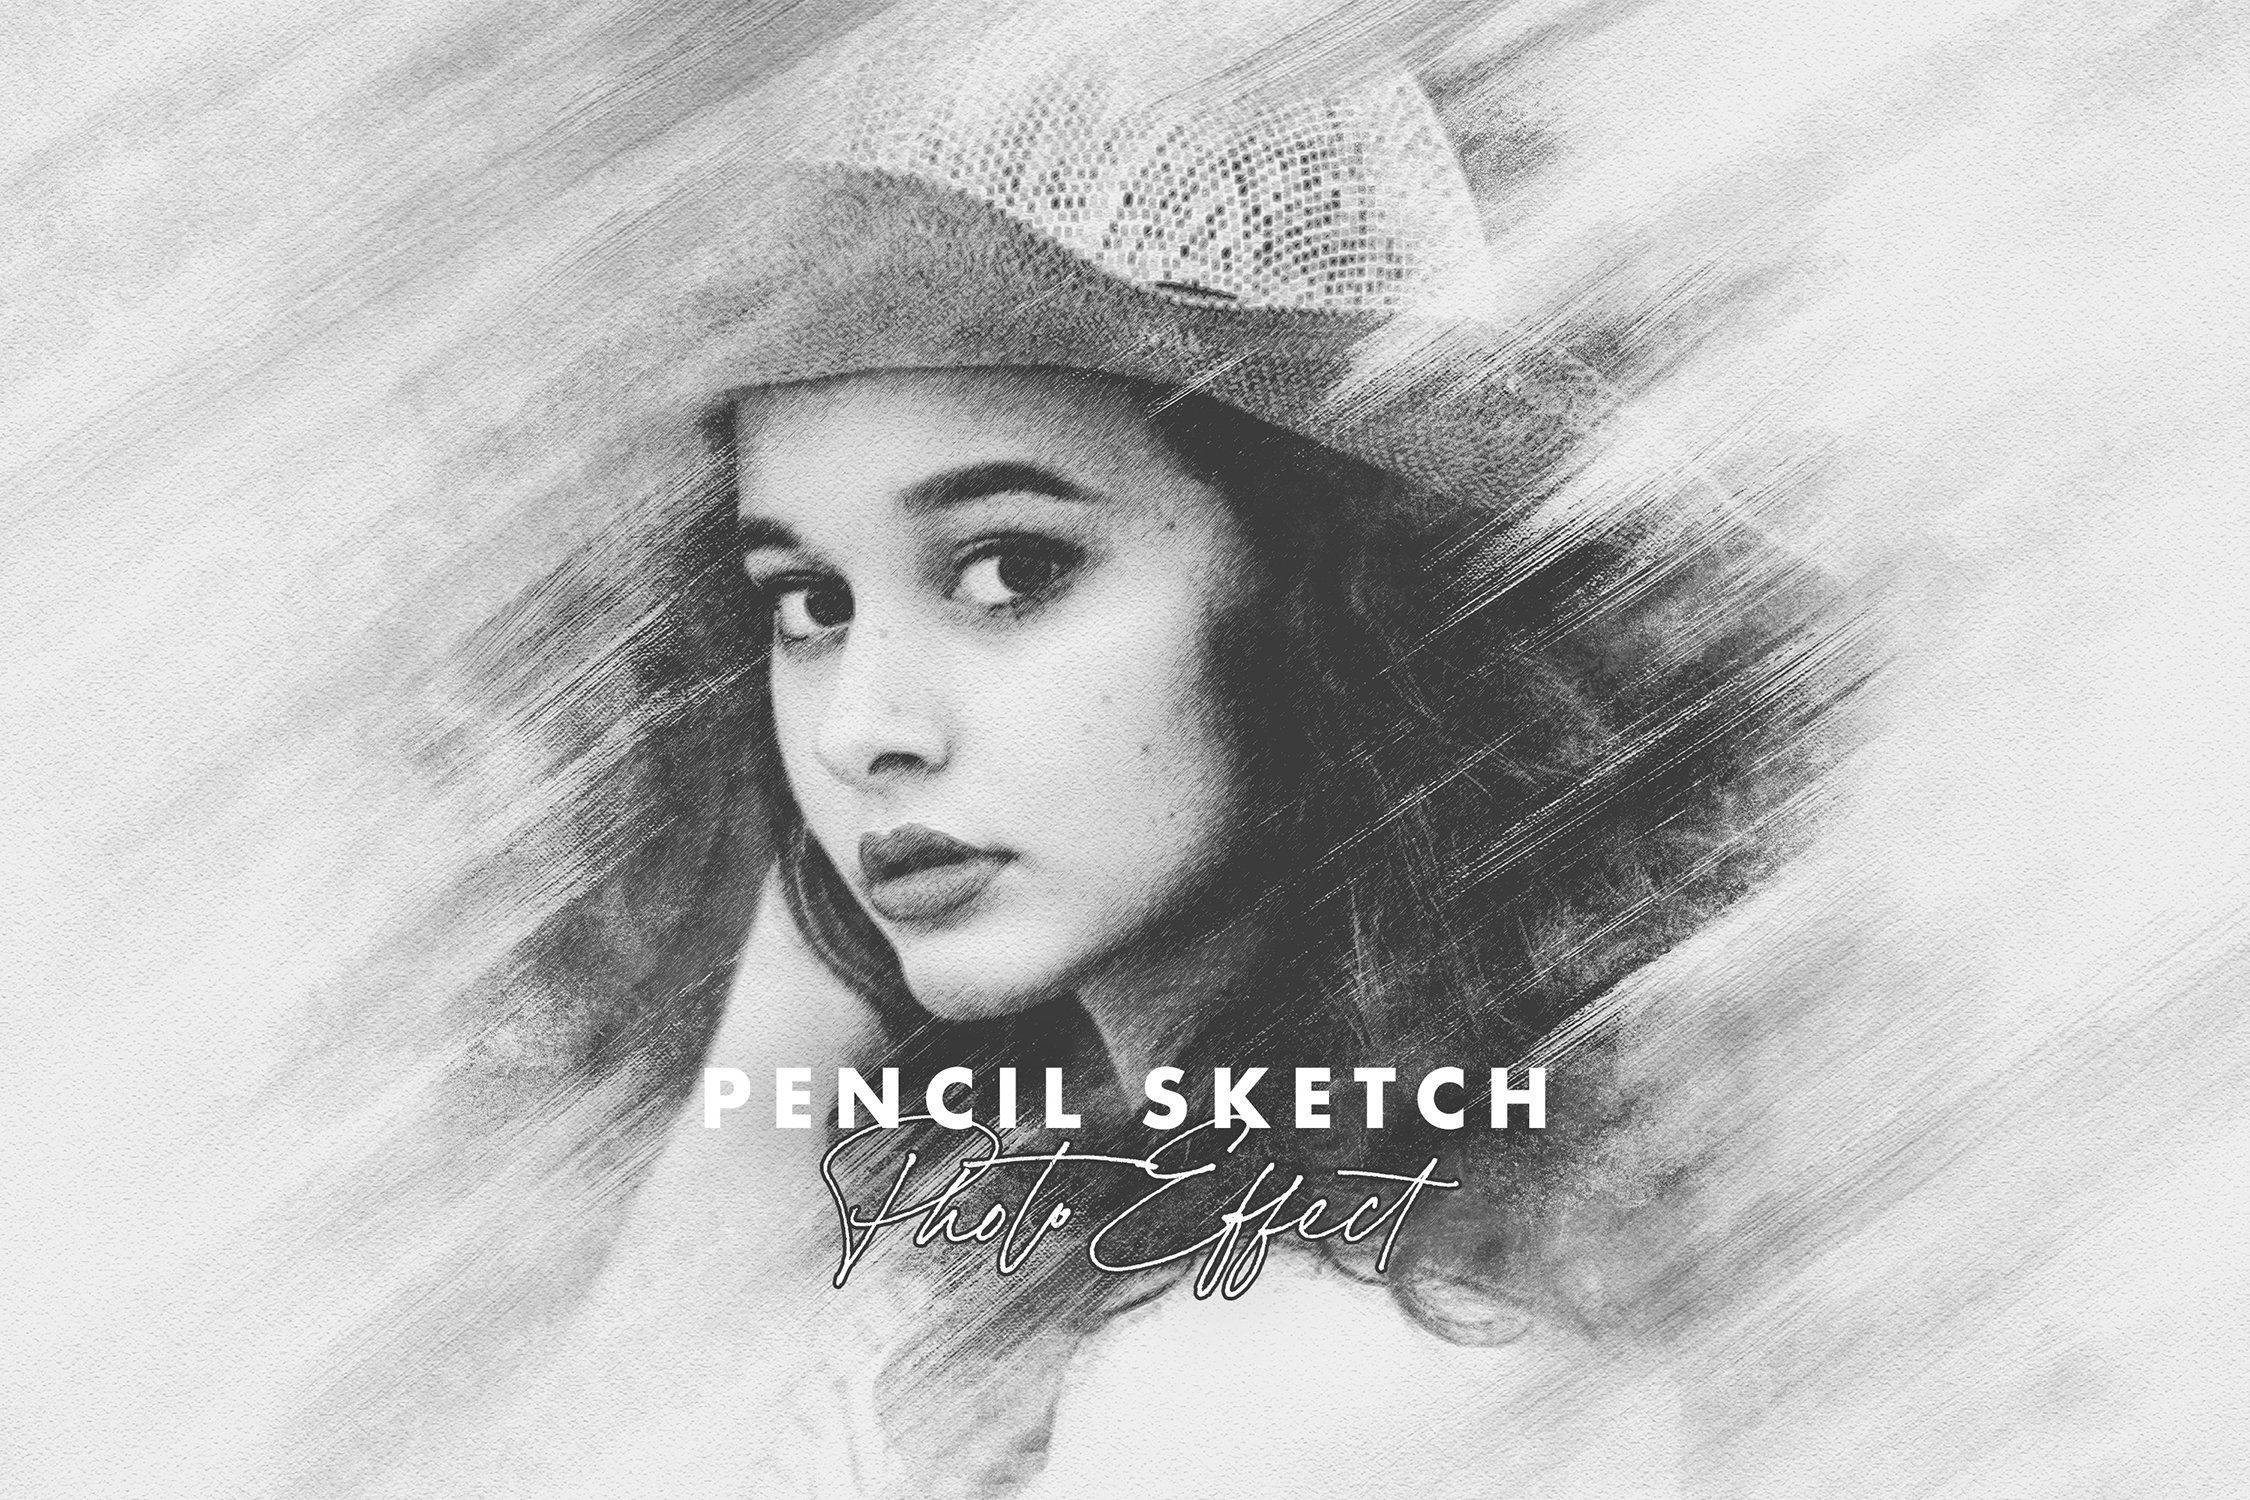 Photo to Pencil Sketch Effect in Photoshop (VIDEO) - Creative Pad Media